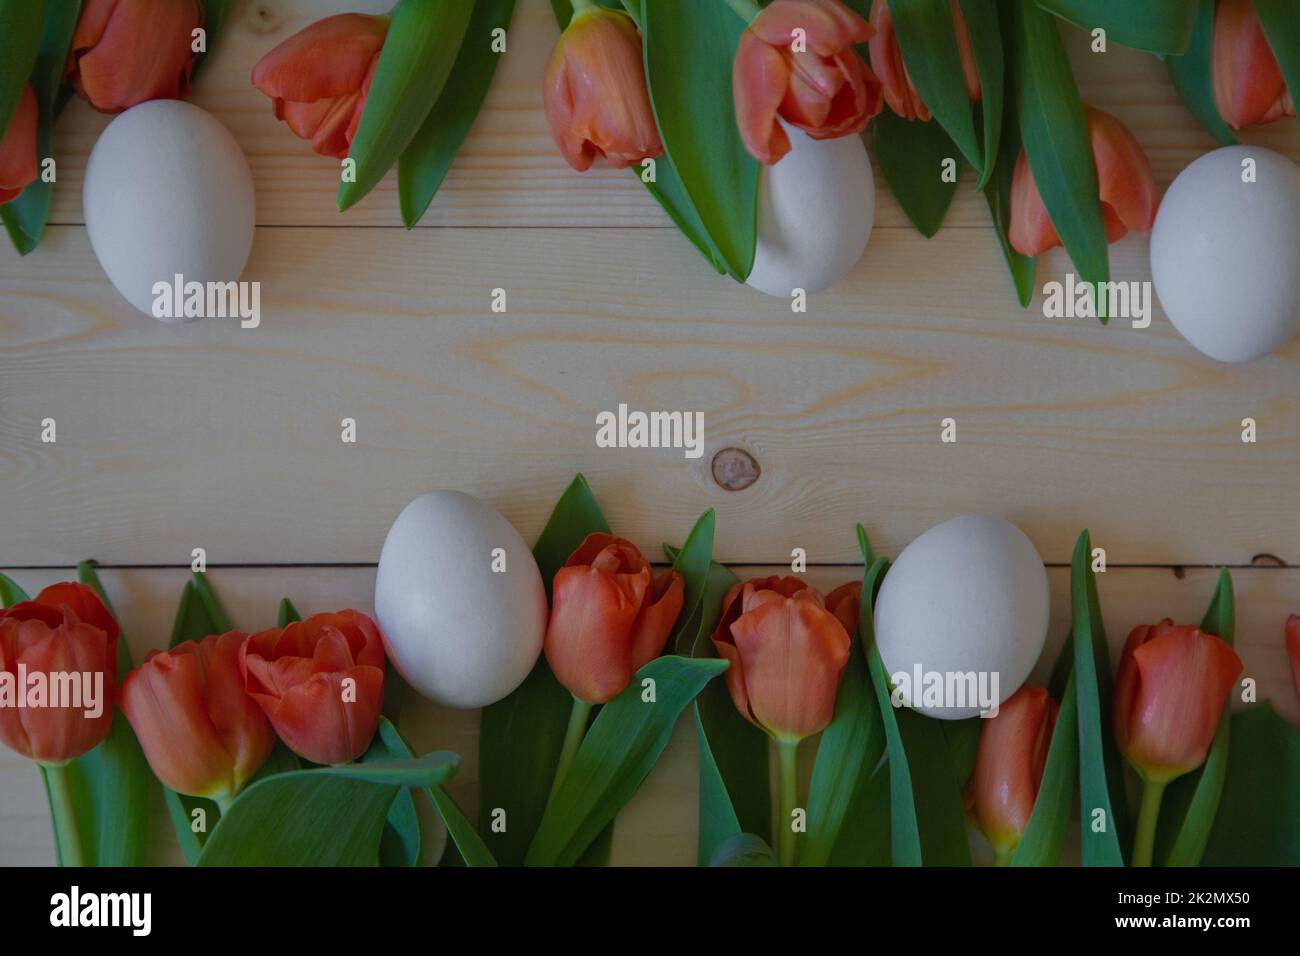 Pink tulips with green leaves lie in a row at the bottom and top on a wooden background with a place for text, white Easter eggs are cut next to them Stock Photo